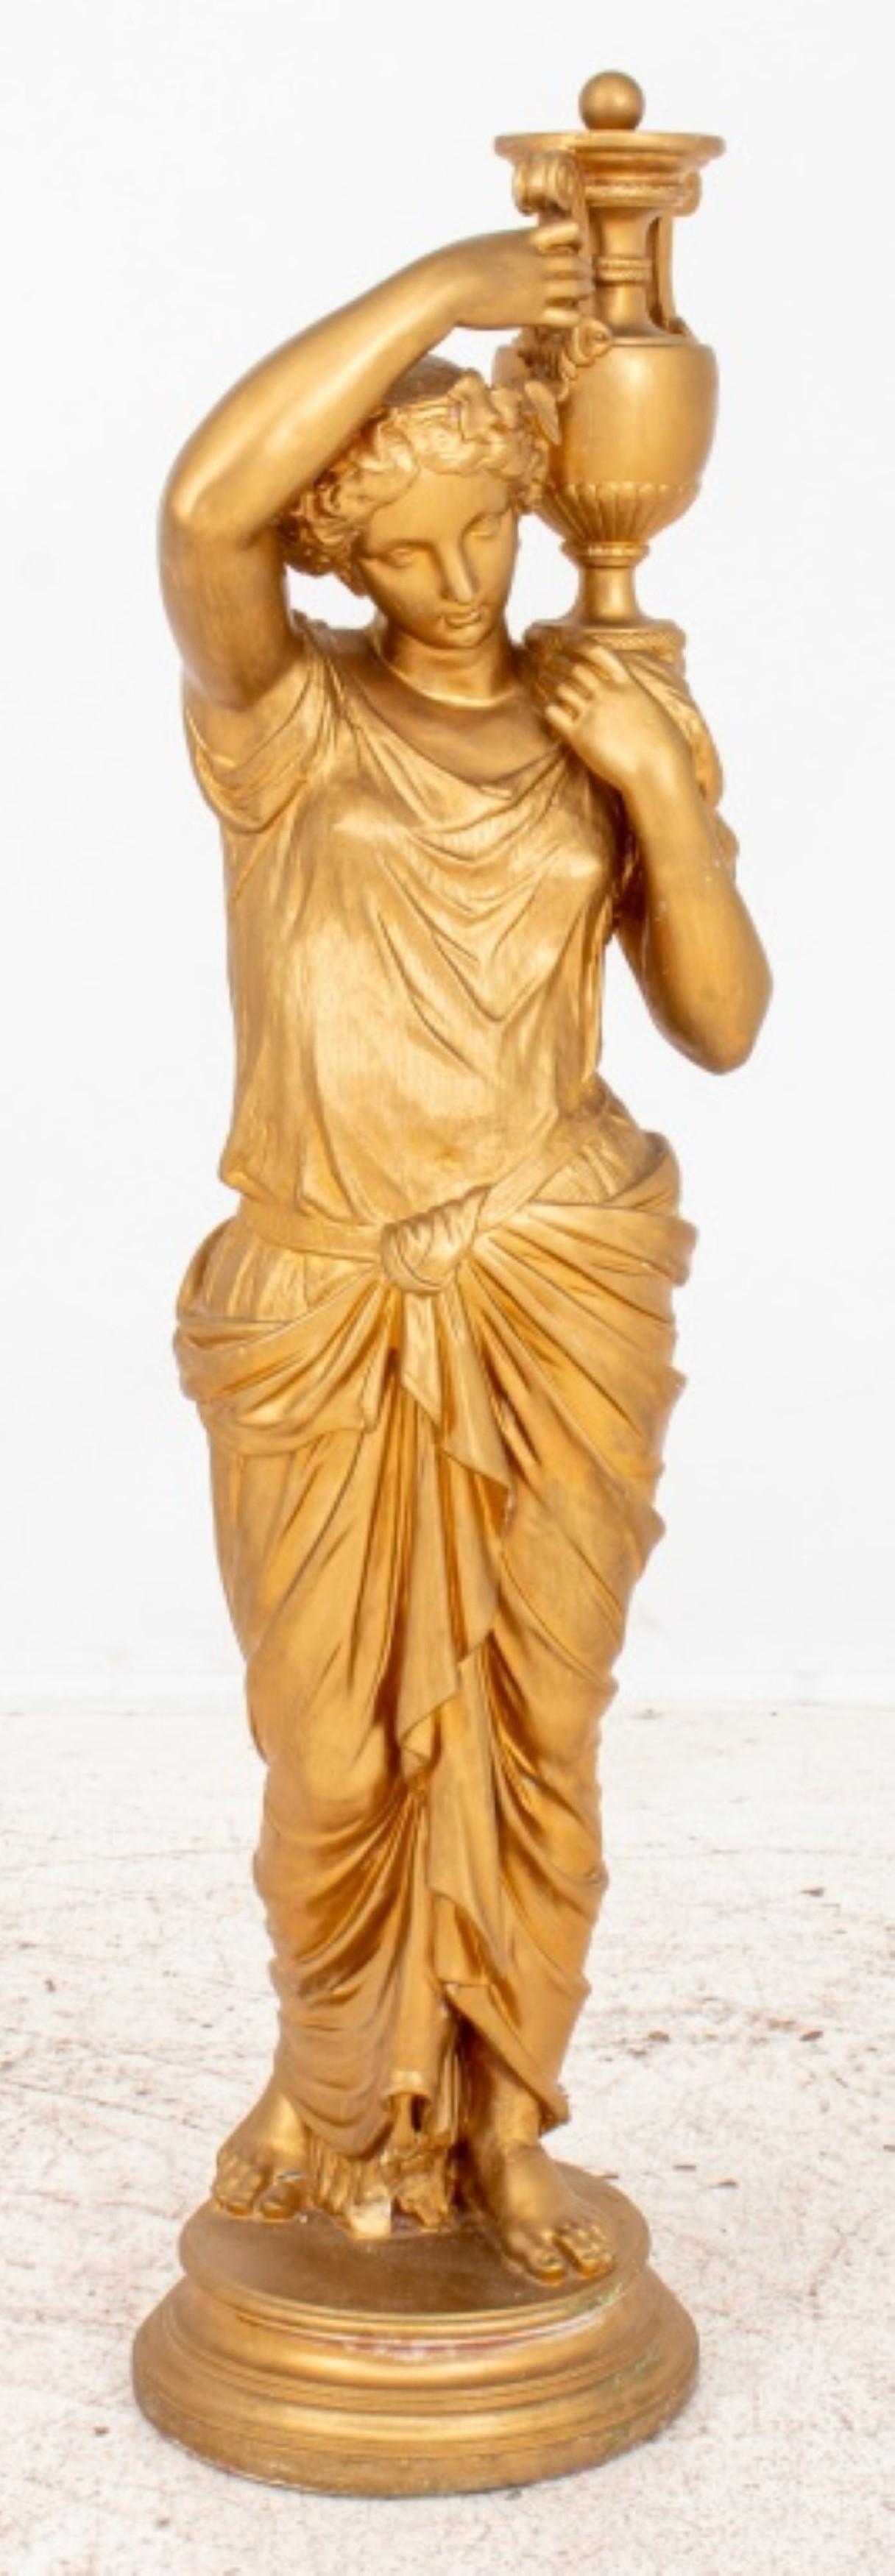 Gilded Plaster Statue, Possibly Hebe In Good Condition For Sale In New York, NY